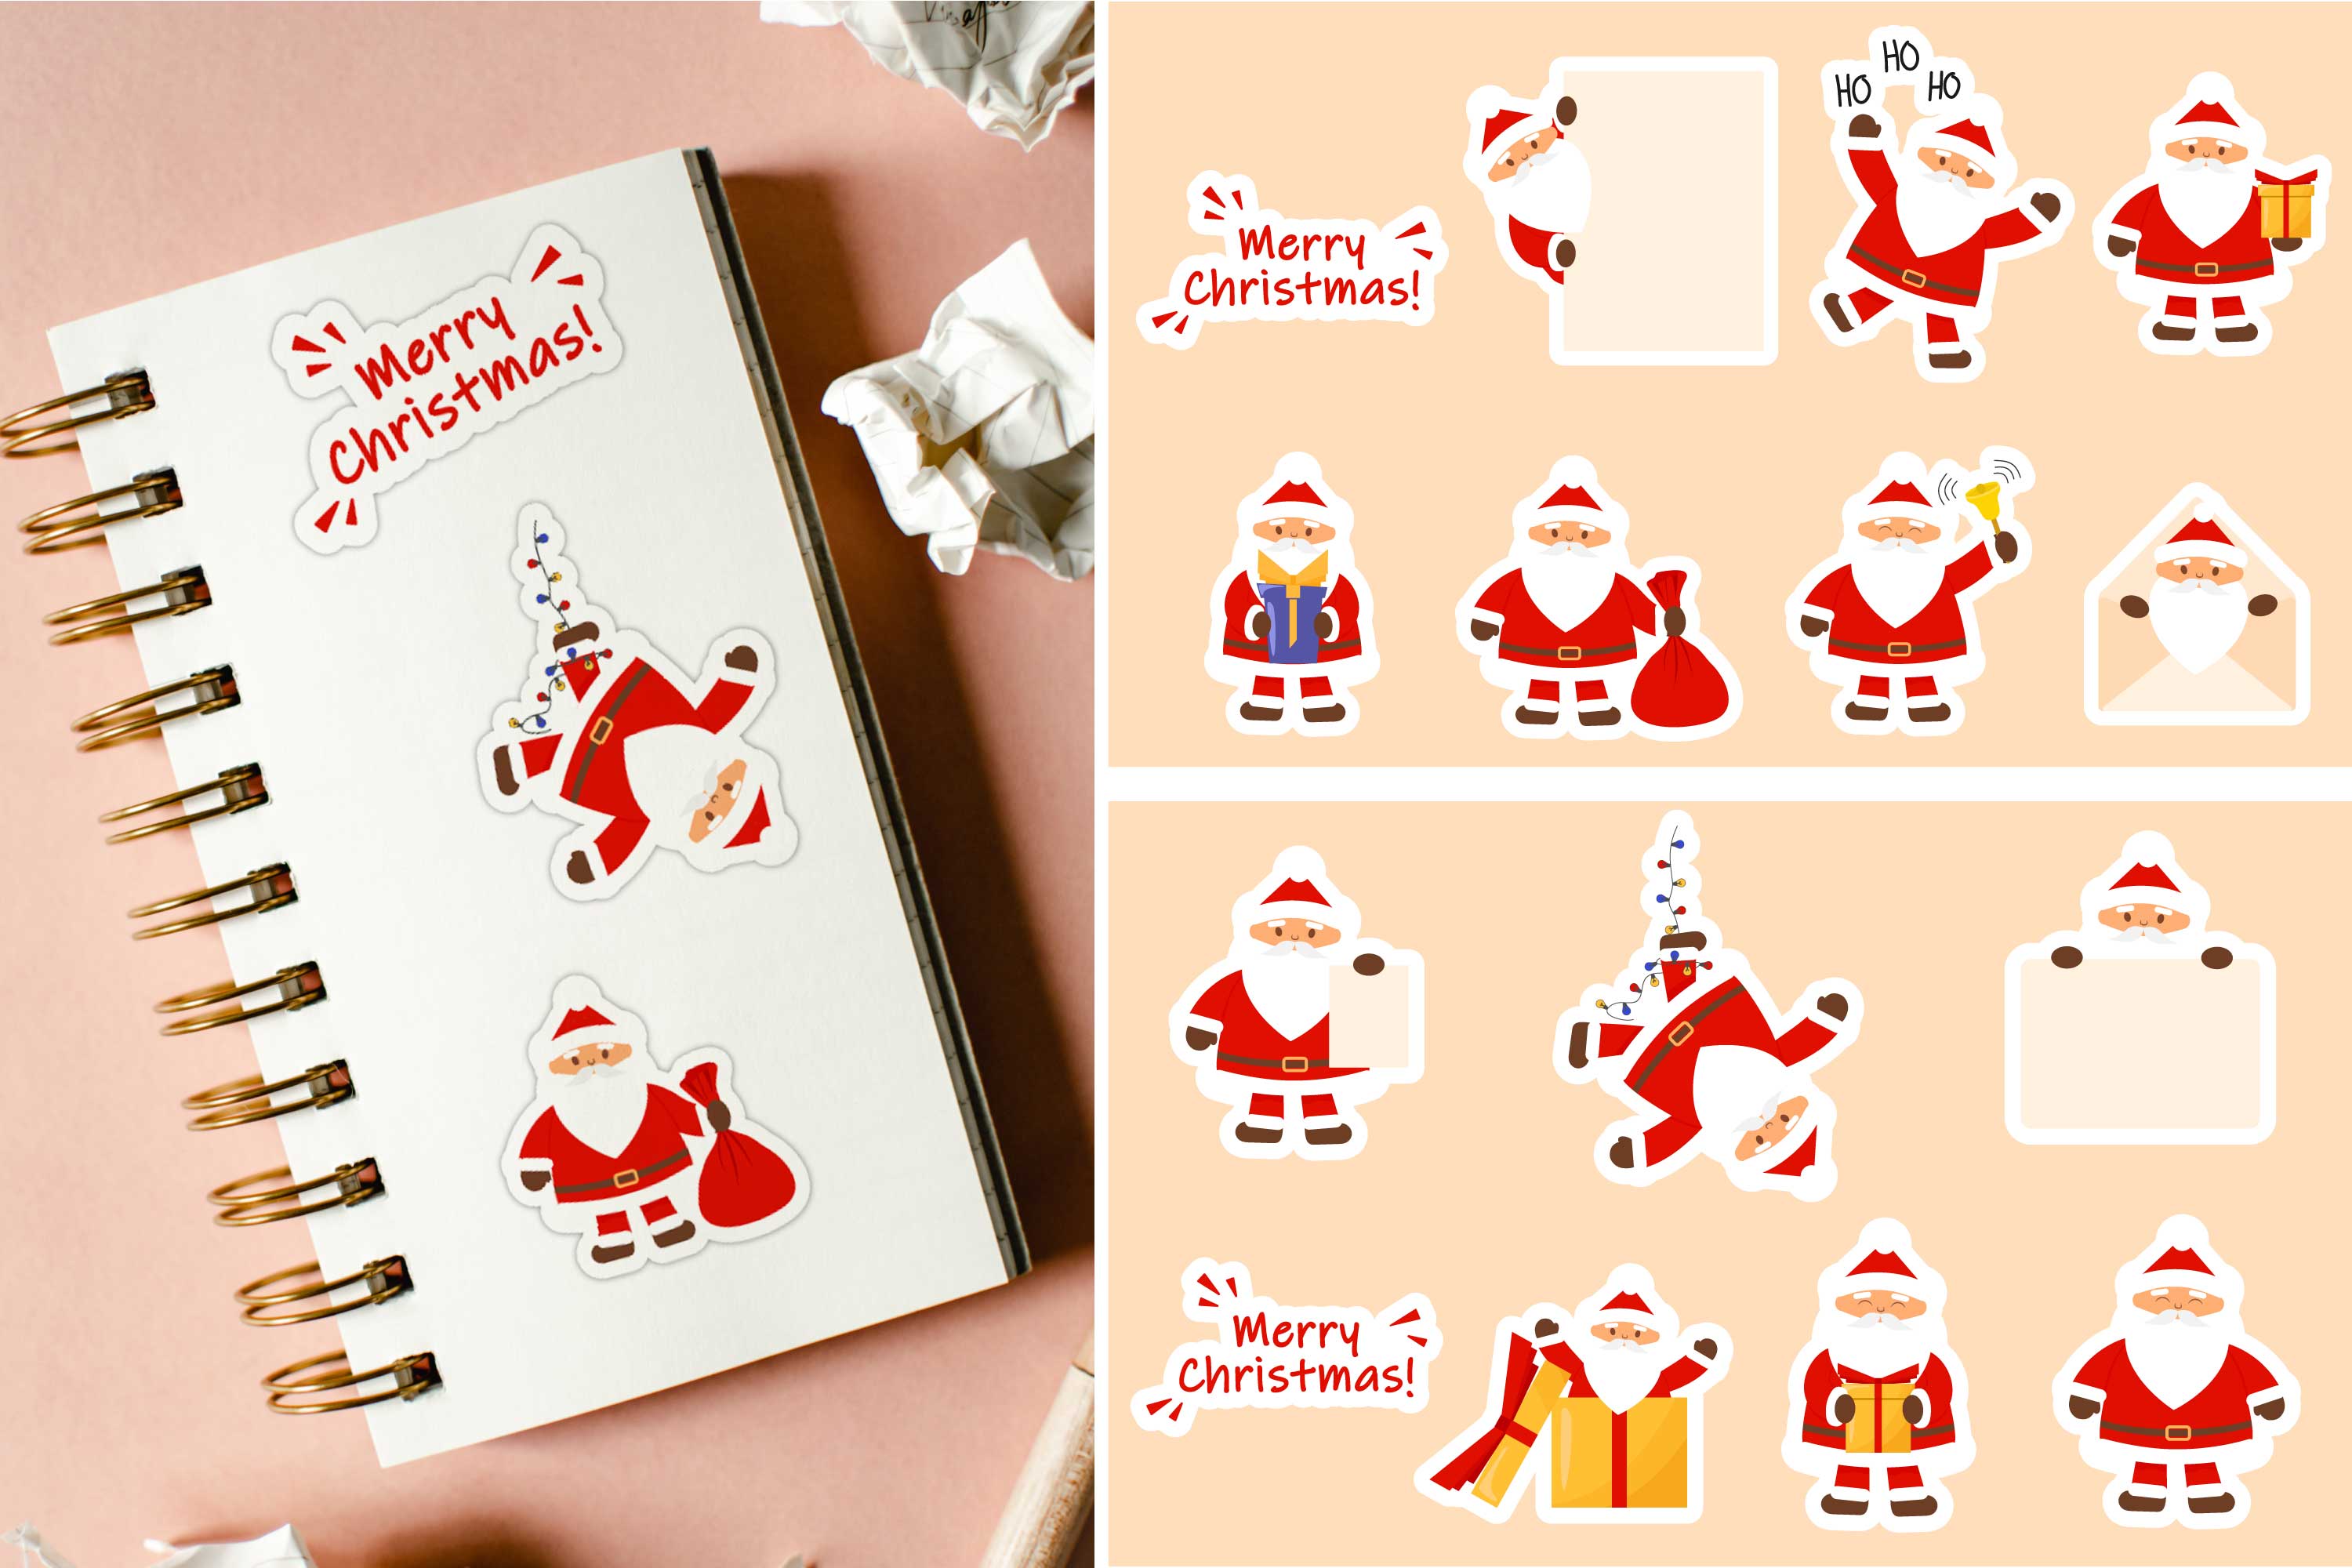 A set of irresistible images of cute Santa stickers